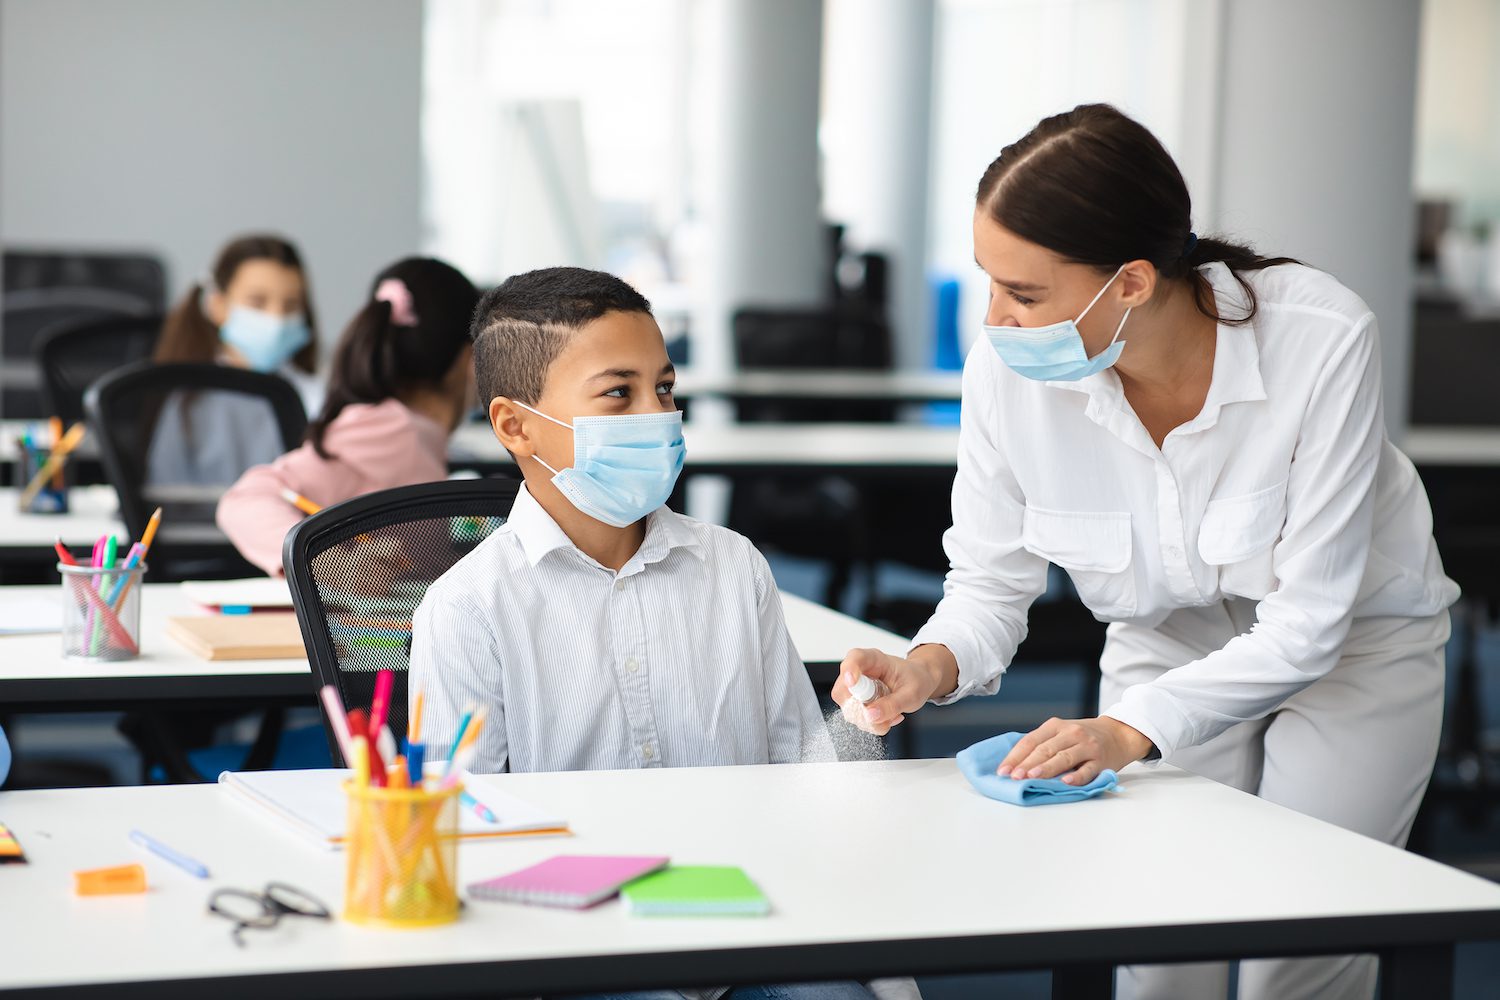 Teacher and student in classroom with masks